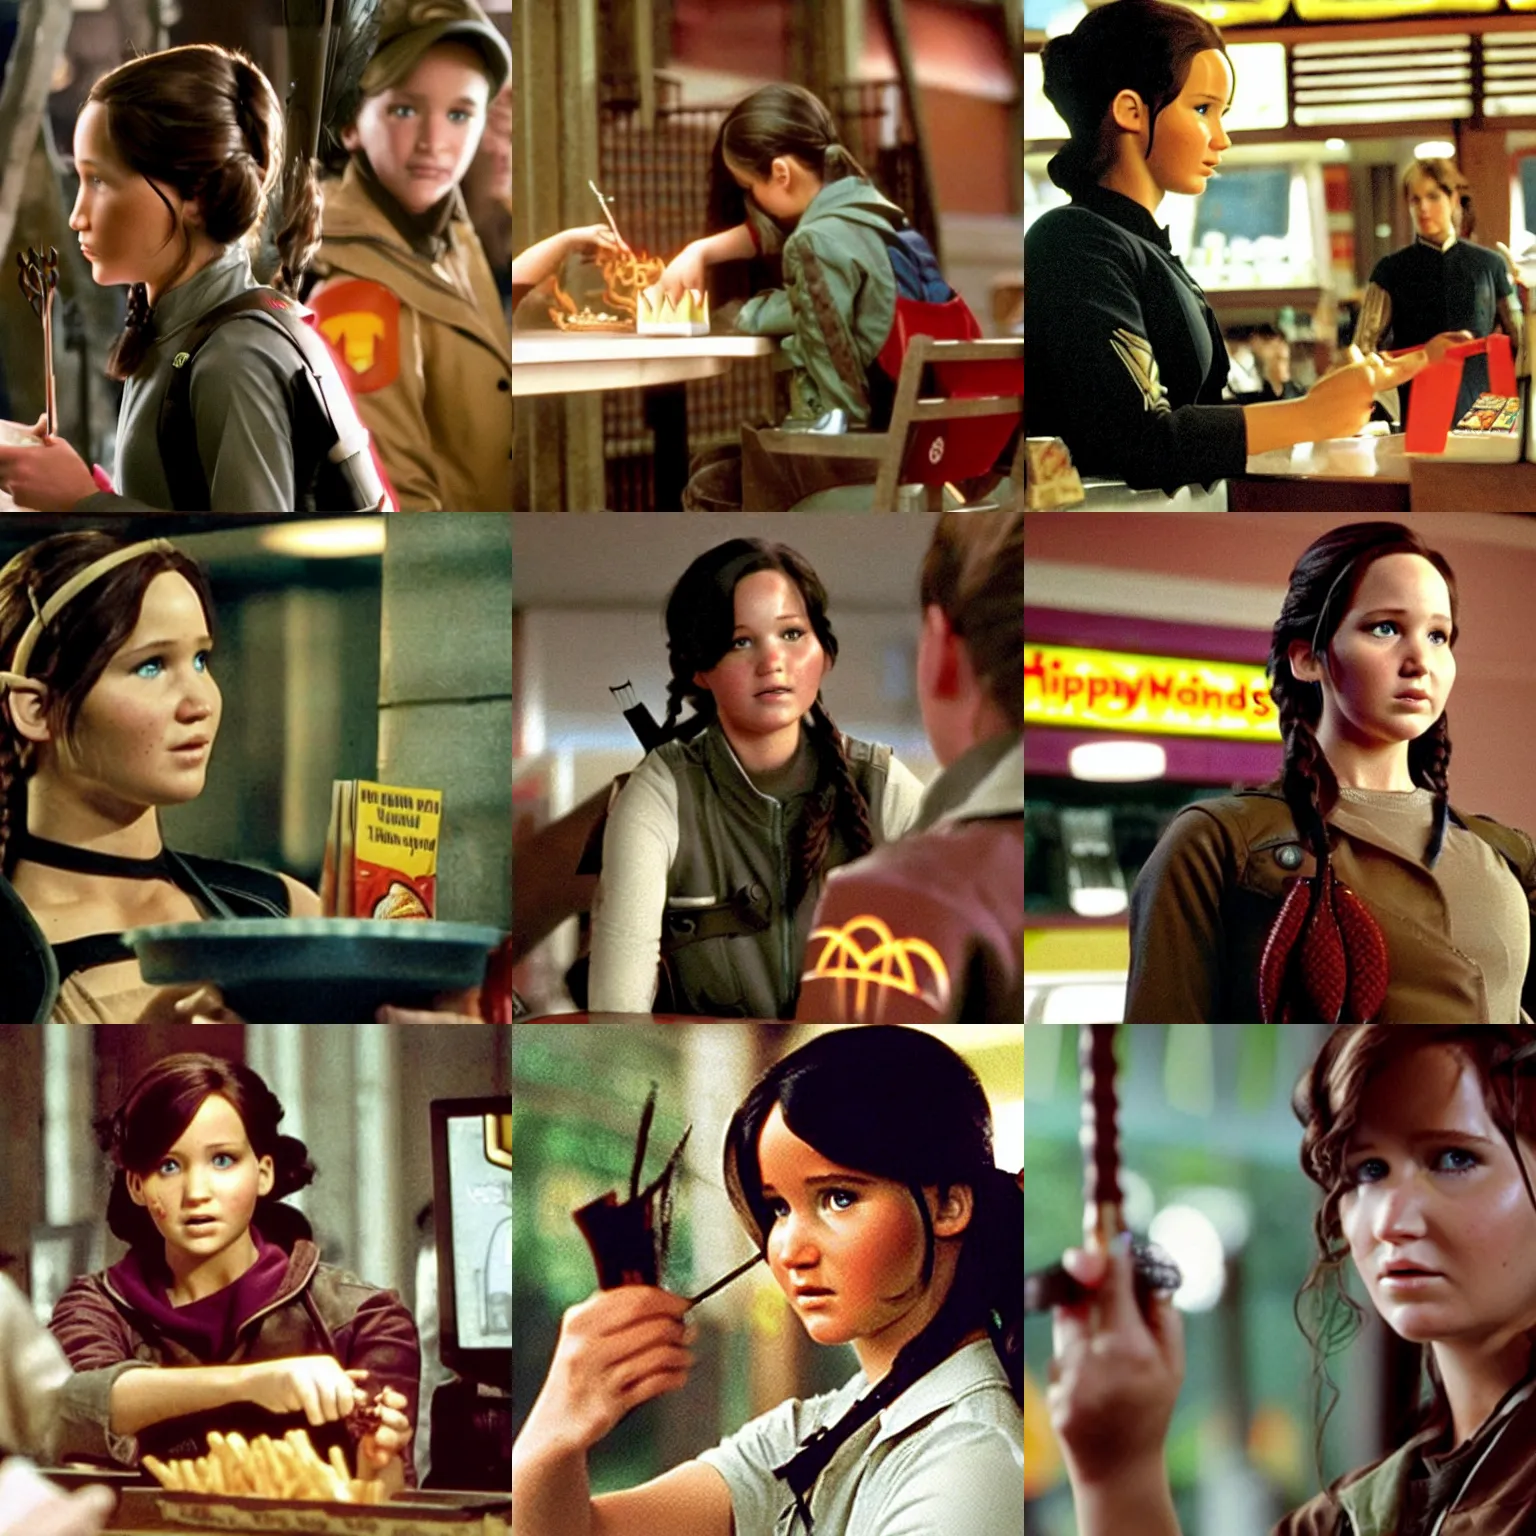 Prompt: Katniss Everdeen ordering a Happy Meal at McDonald's, film still from 'The Hunger Games'